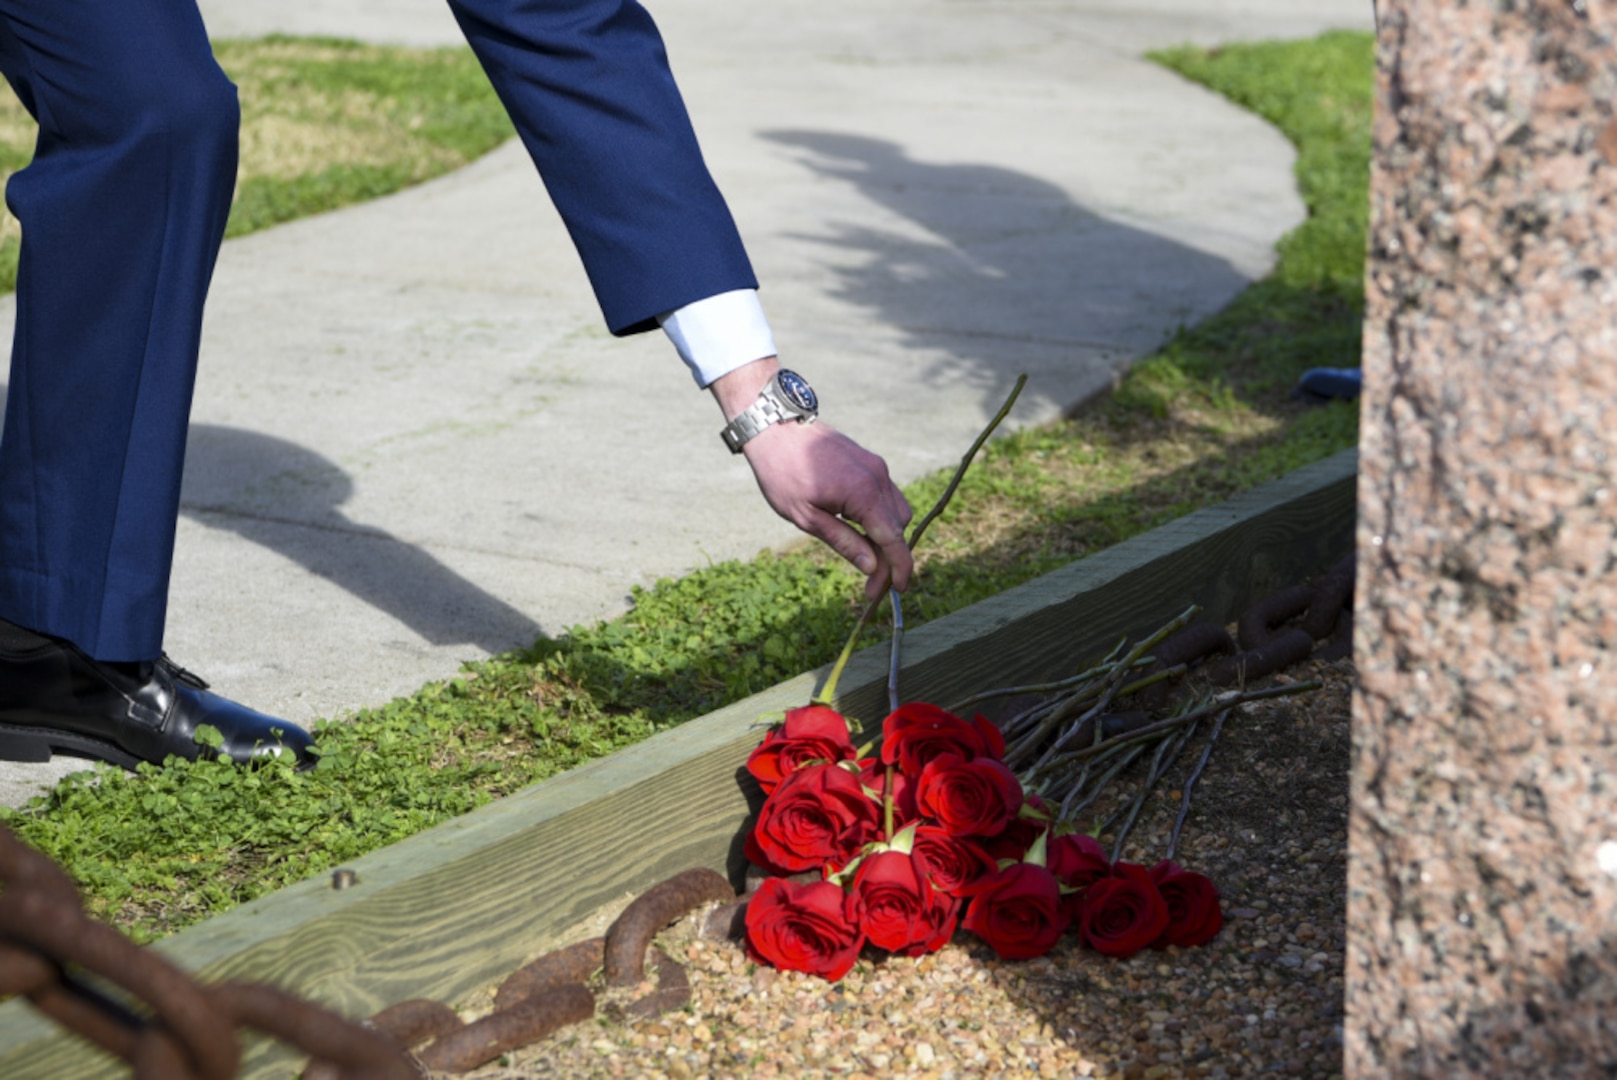 A crew member from one of Sector Houston-Galveston's underlying units lays a rose to commemorate a fallen crew member of the Coast Guard Cutter Blackthorn during the 41st-anniversary memorial service Jan. 28, 2021, at Base Galveston in Galveston, Texas. The Coast Guard Cutter Blackthorn sank after colliding with the tanker vessel Capricorn in Tampa, Florida, near the Sunshine Skyway Bridge Jan. 28, 1980 and lost 23 of its 50 crew members in the Coast Guard’s worst peacetime disaster. (U.S. Coast Guard photo by Petty Officer 2nd Class Ryan Dickinson)